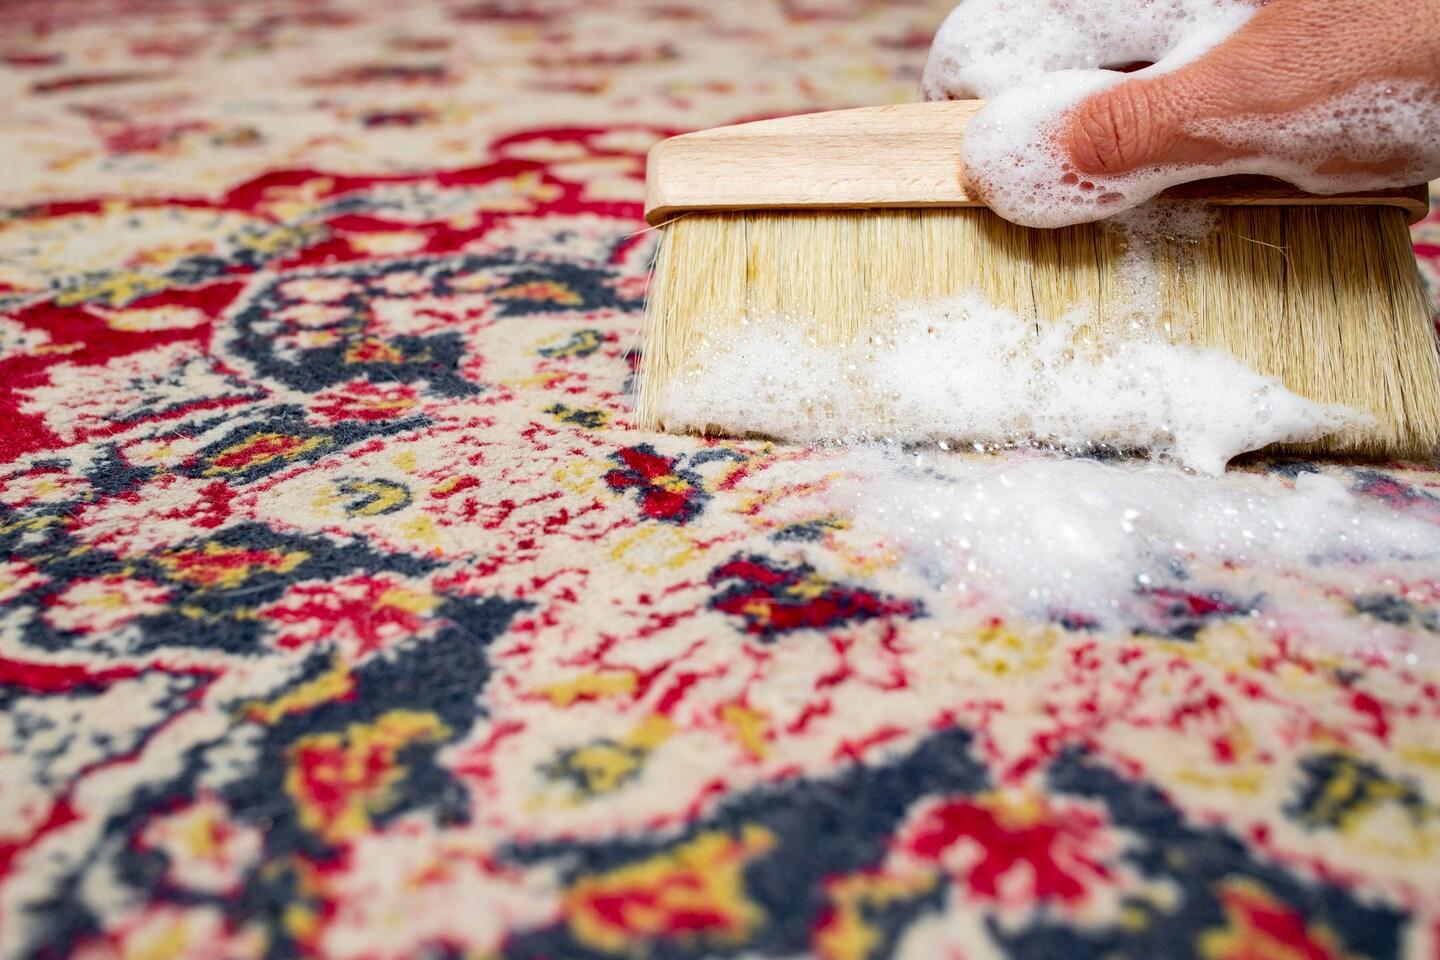 How to clean an area rug